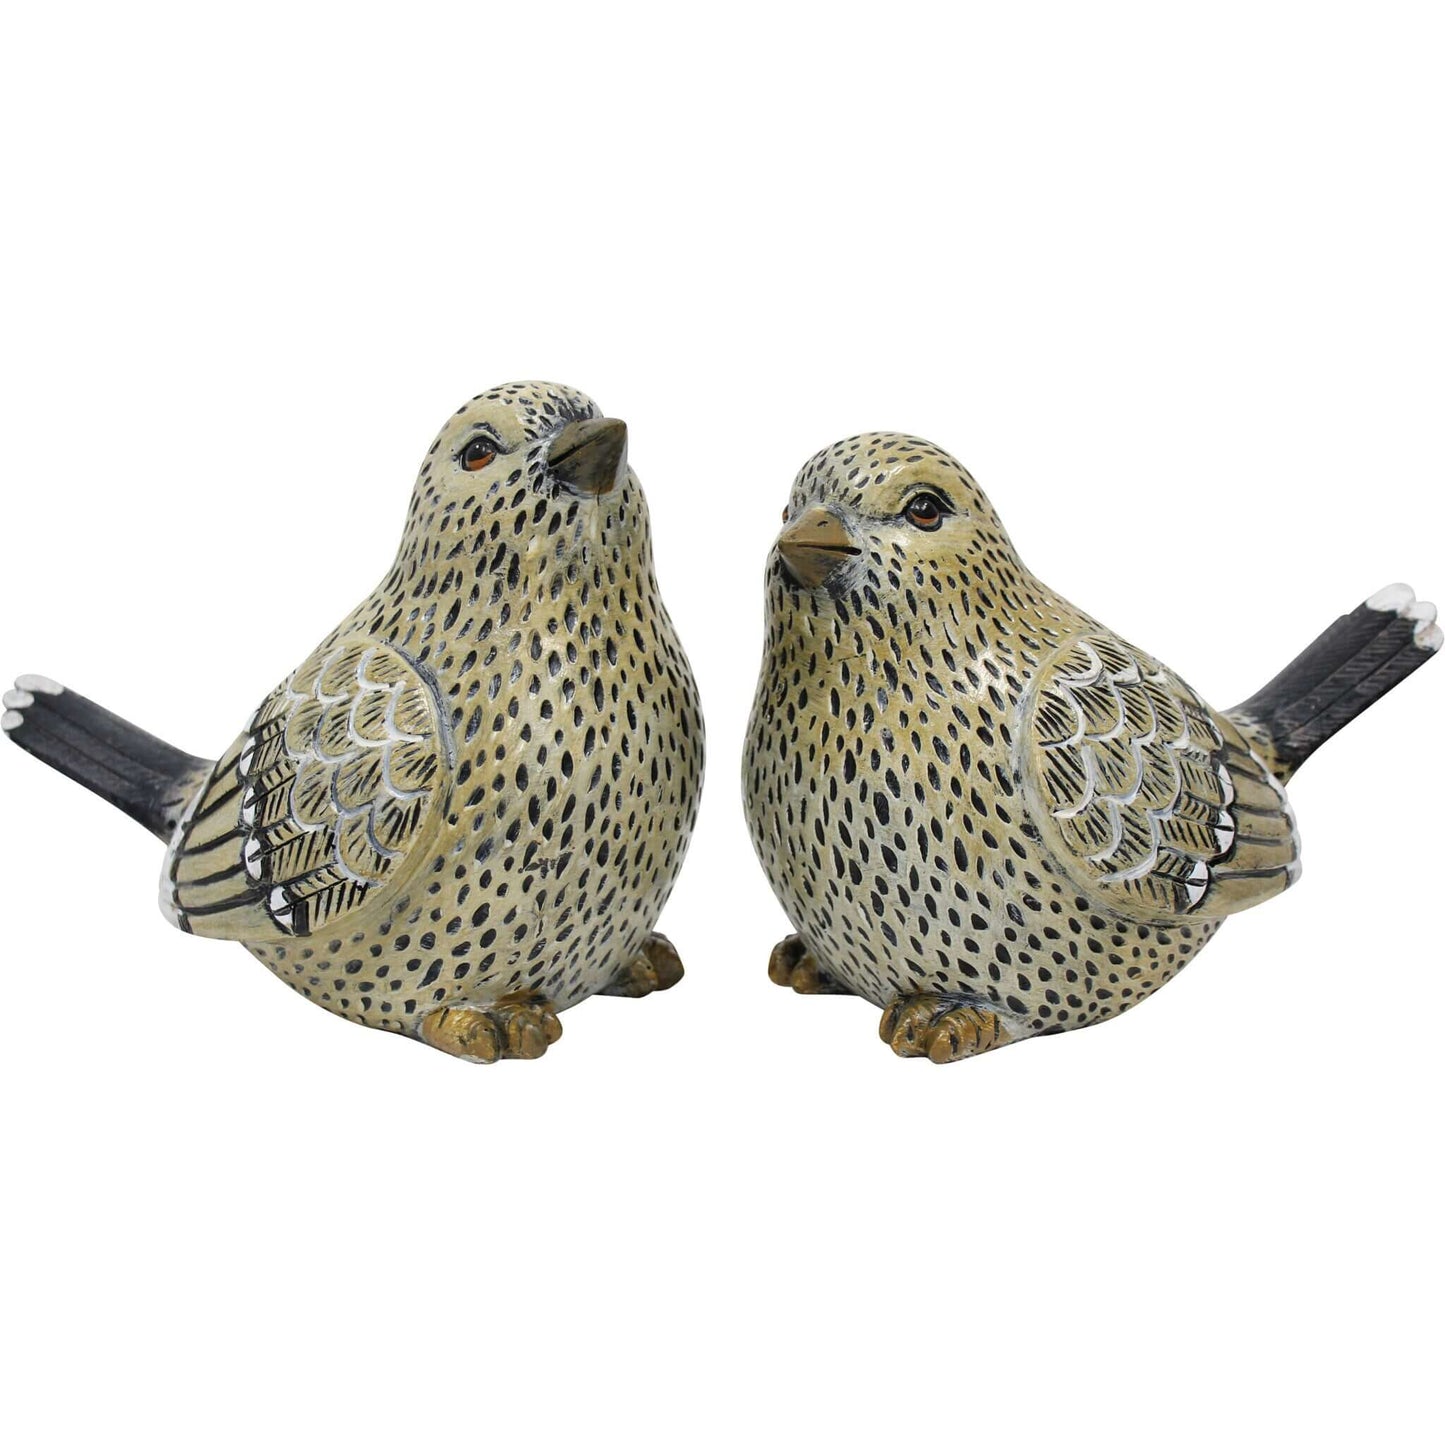 Bird Woodland Set of 3 Ornament - The Renmy Store Homewares & Gifts 